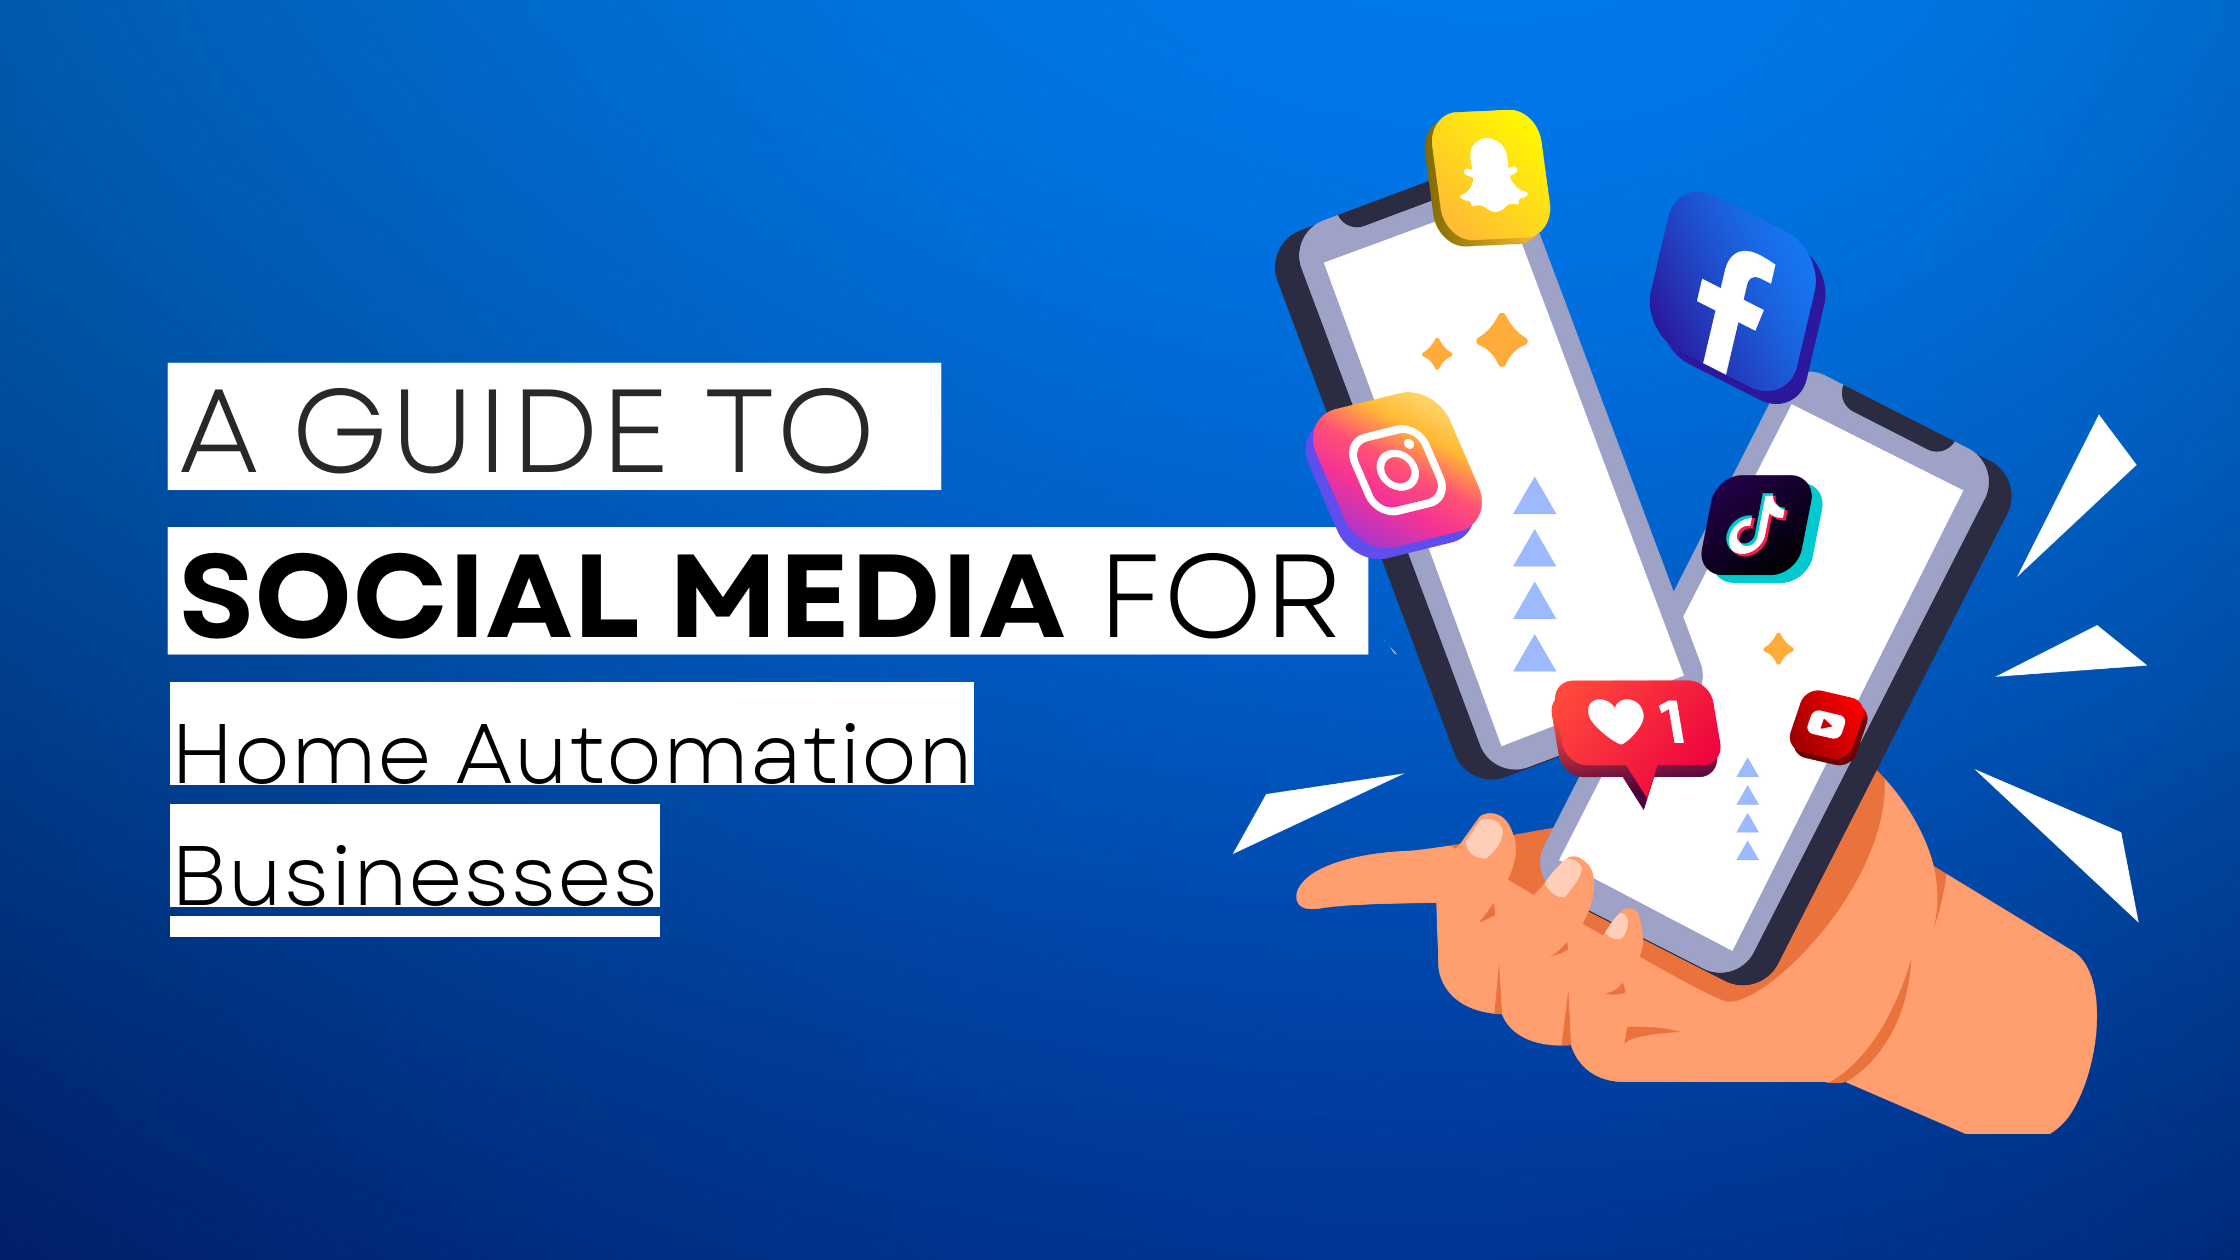 How to start Home Automation  on social media